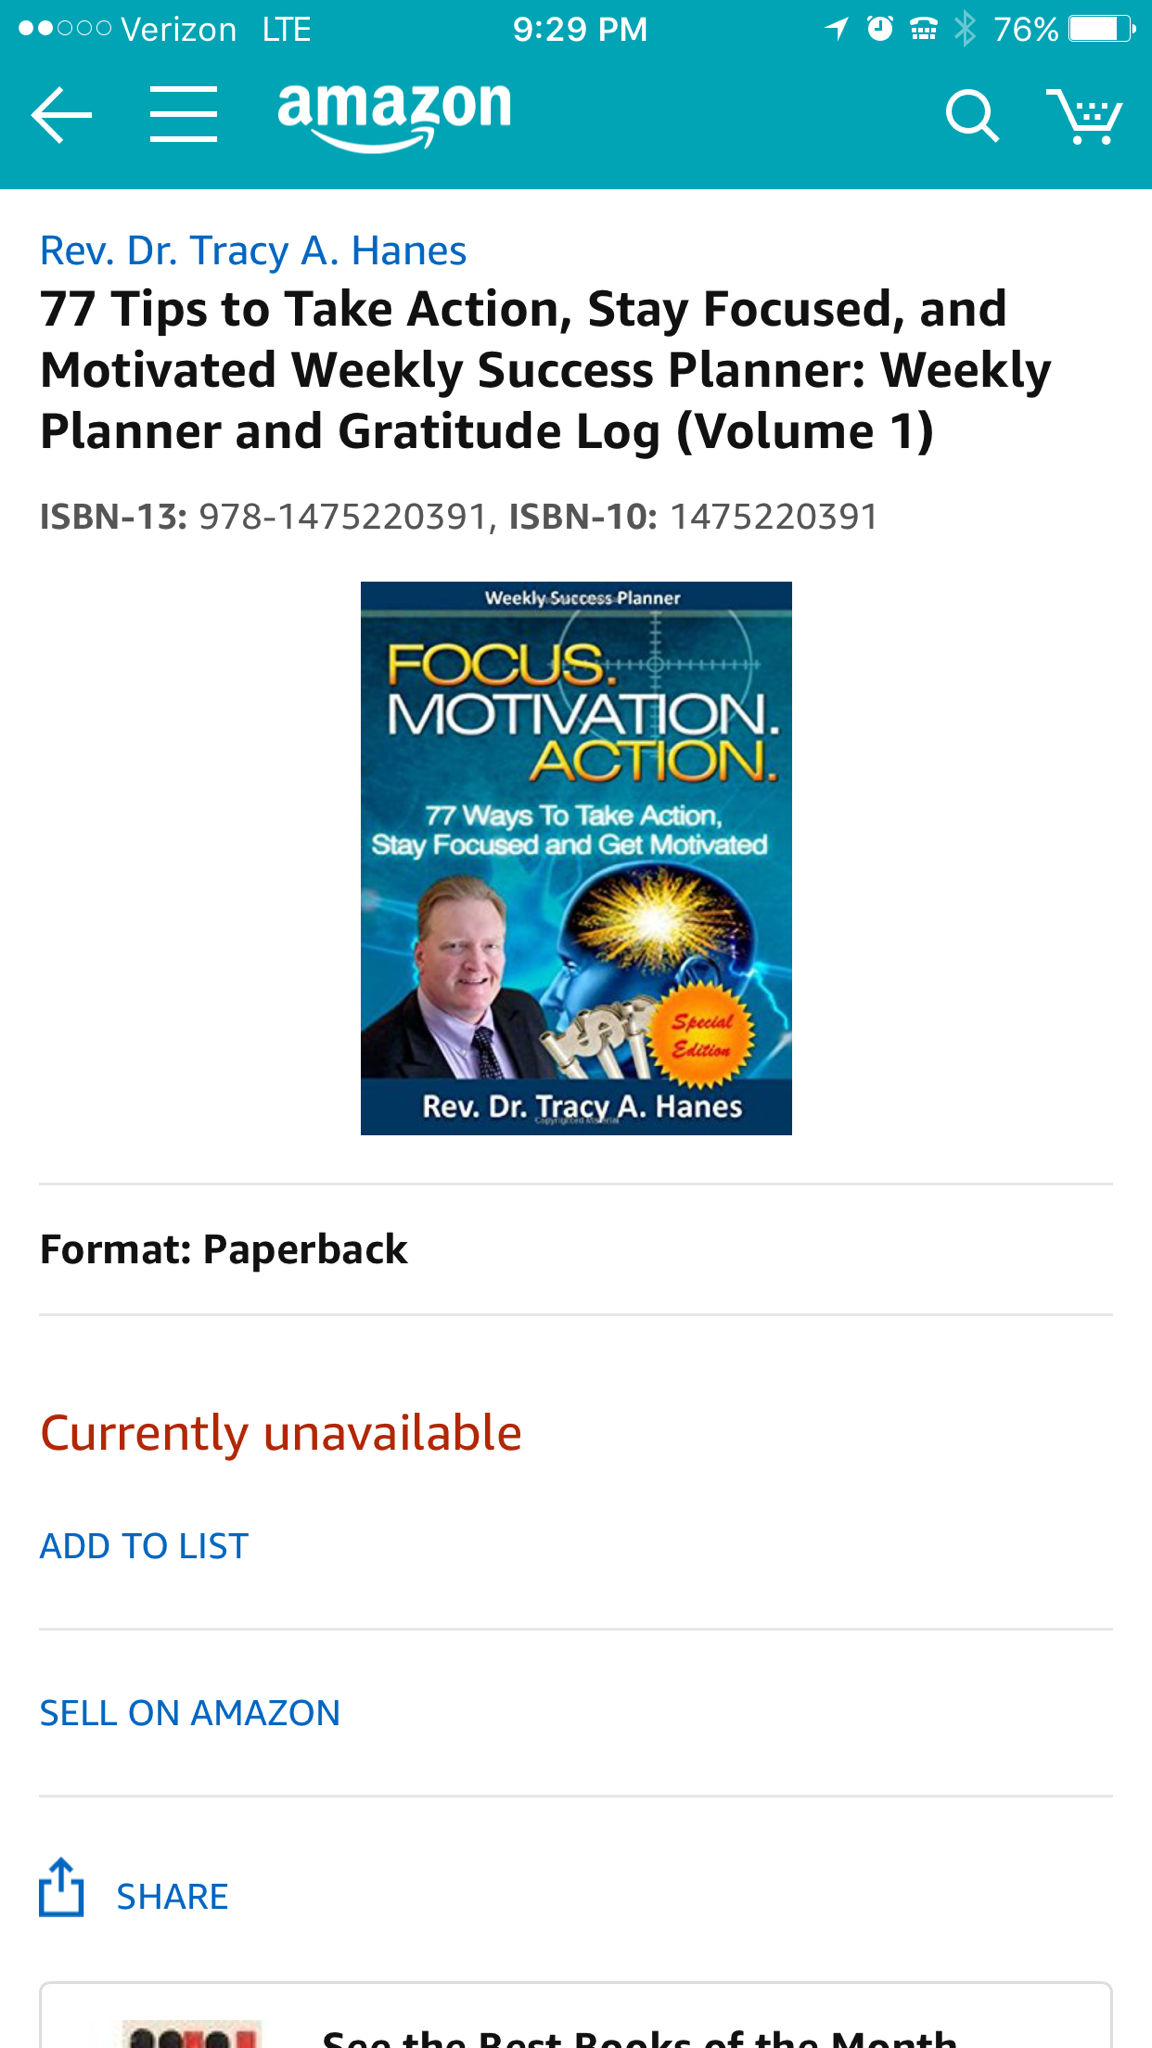 Listed on Amazon falsely advertising as Rev & Dr. 